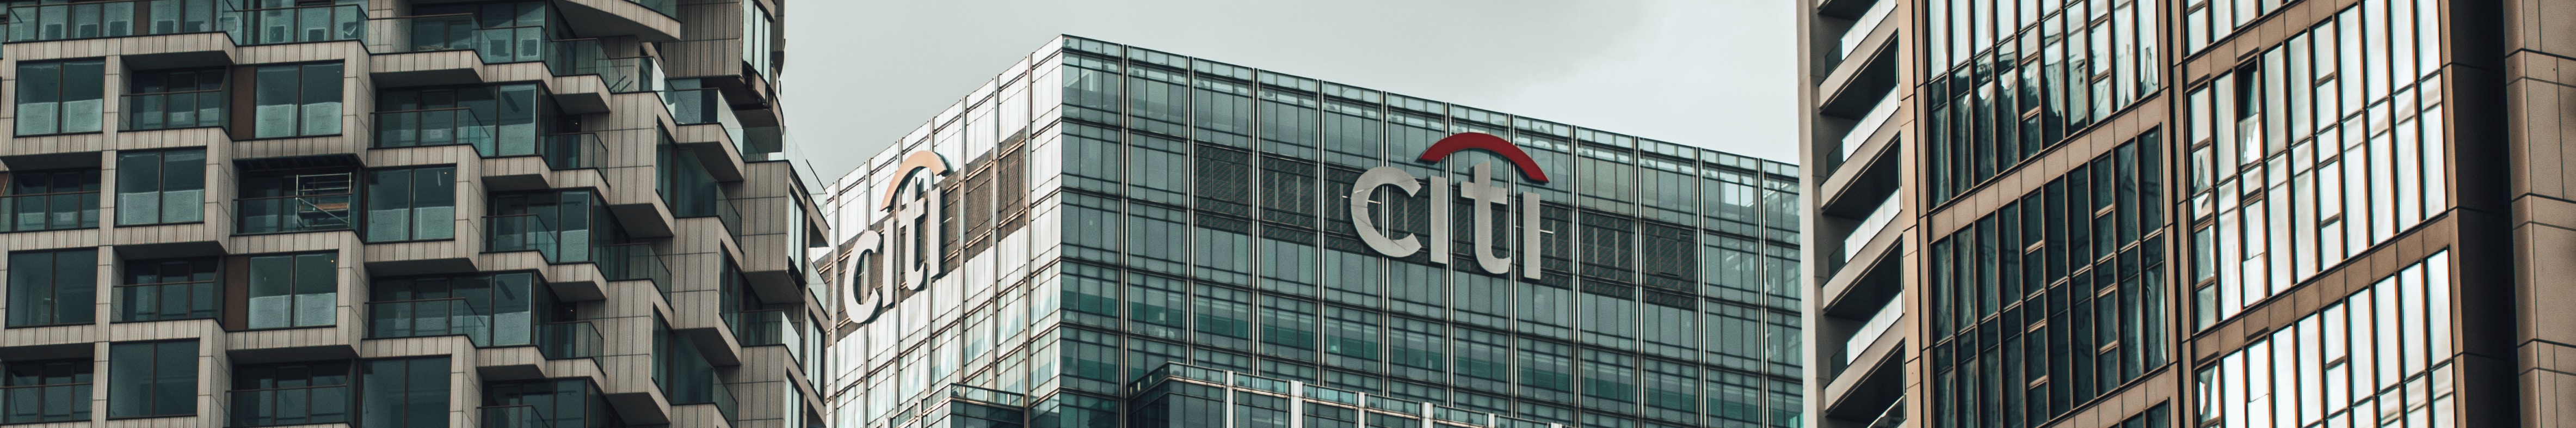 Citigroup invested $33.9 Bn in fossil fuels and $17.3 Bn in renewables in 2022